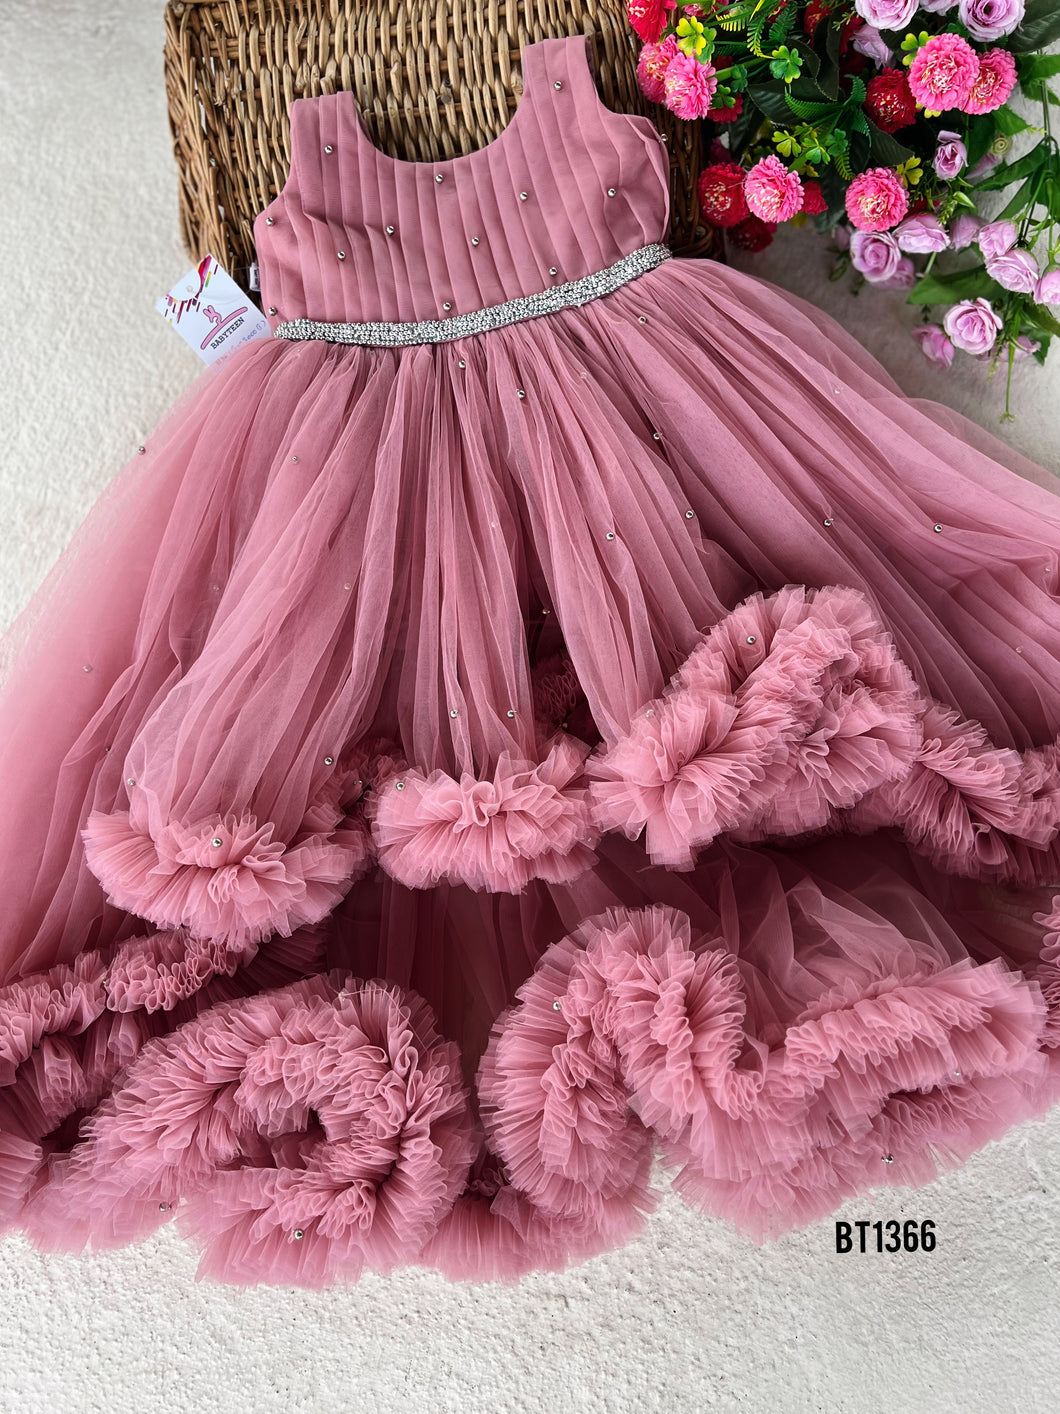 BT1366 Blushing Pink Gemstone Gown - A Fairytale Frolic for Your Little One